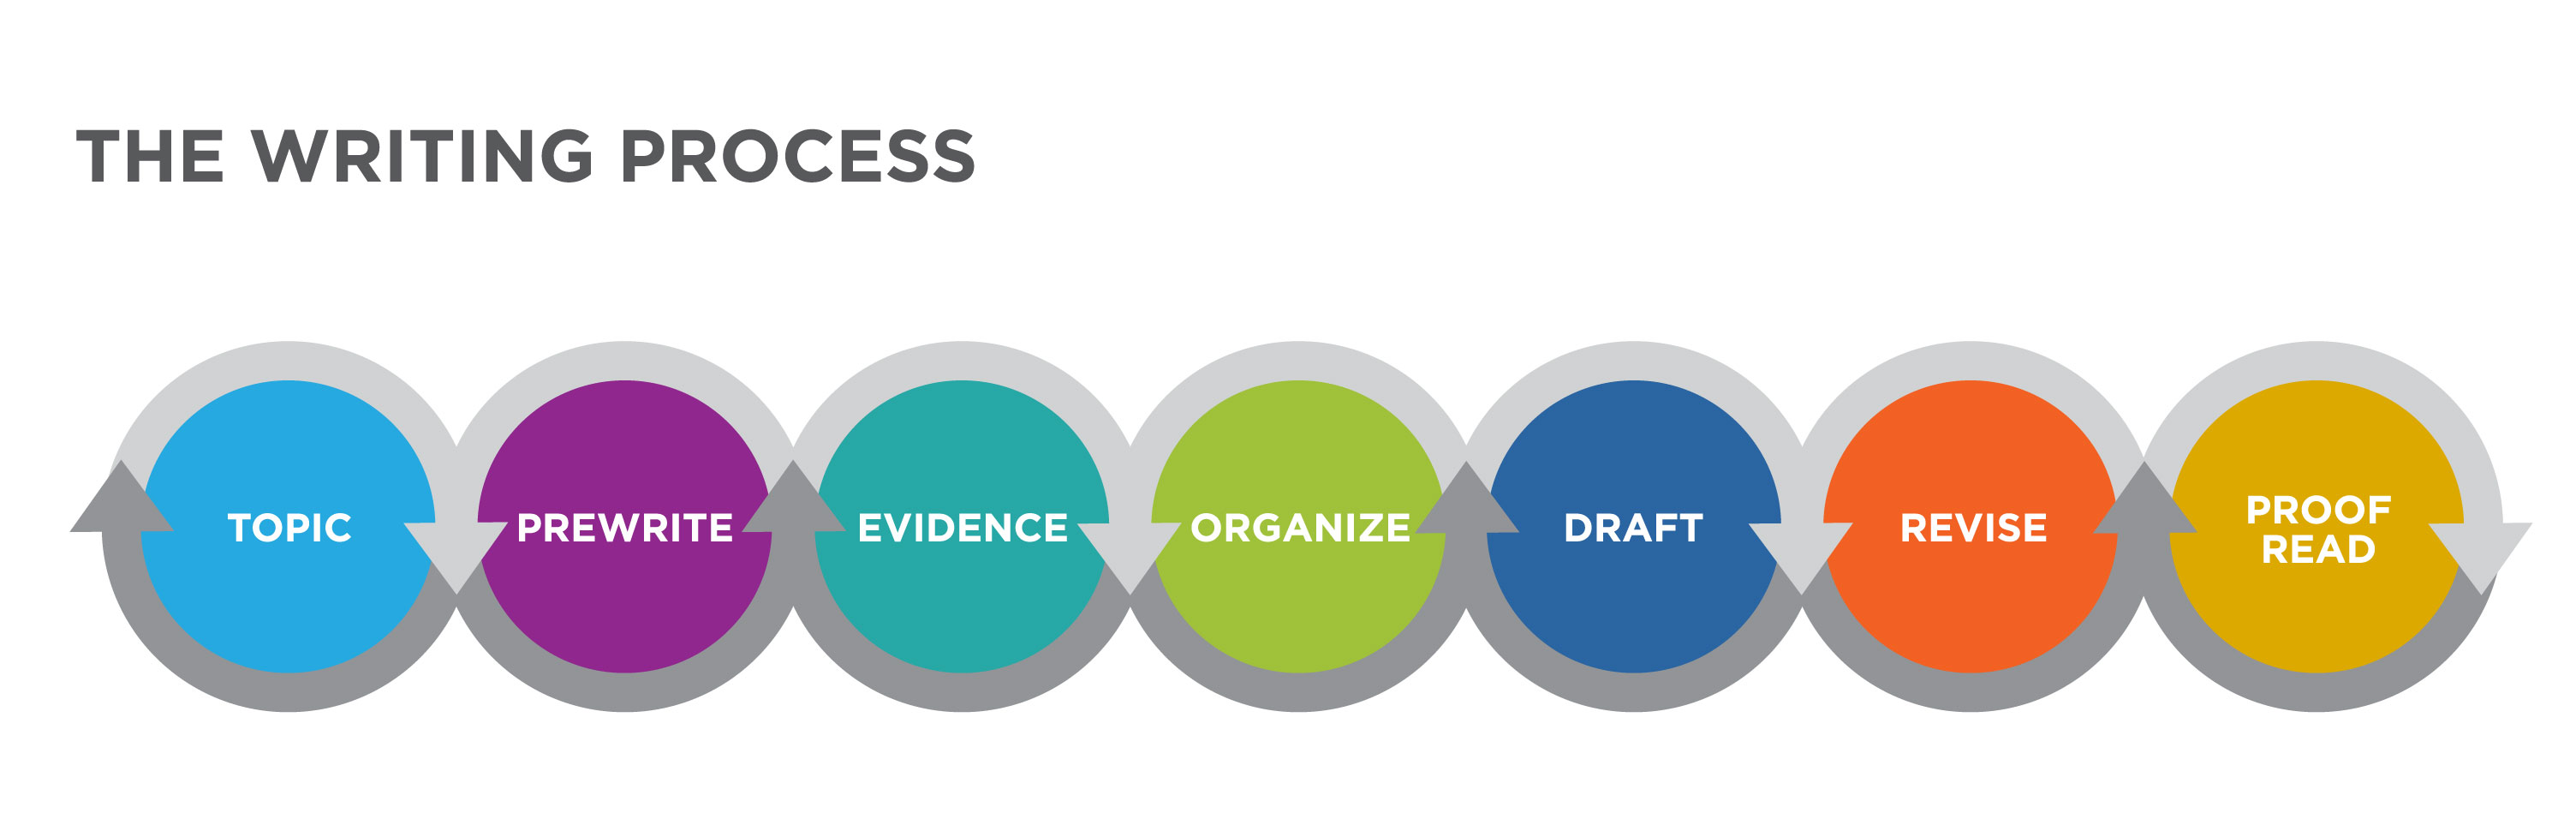 Graphic labeled "The Writing Process." A line of brightly colored circles are connected by gray arrows wrapping around them. From left to right, they read: Topic, Prewrite, Evidence, Organize, Draft, Revise, Proofread.